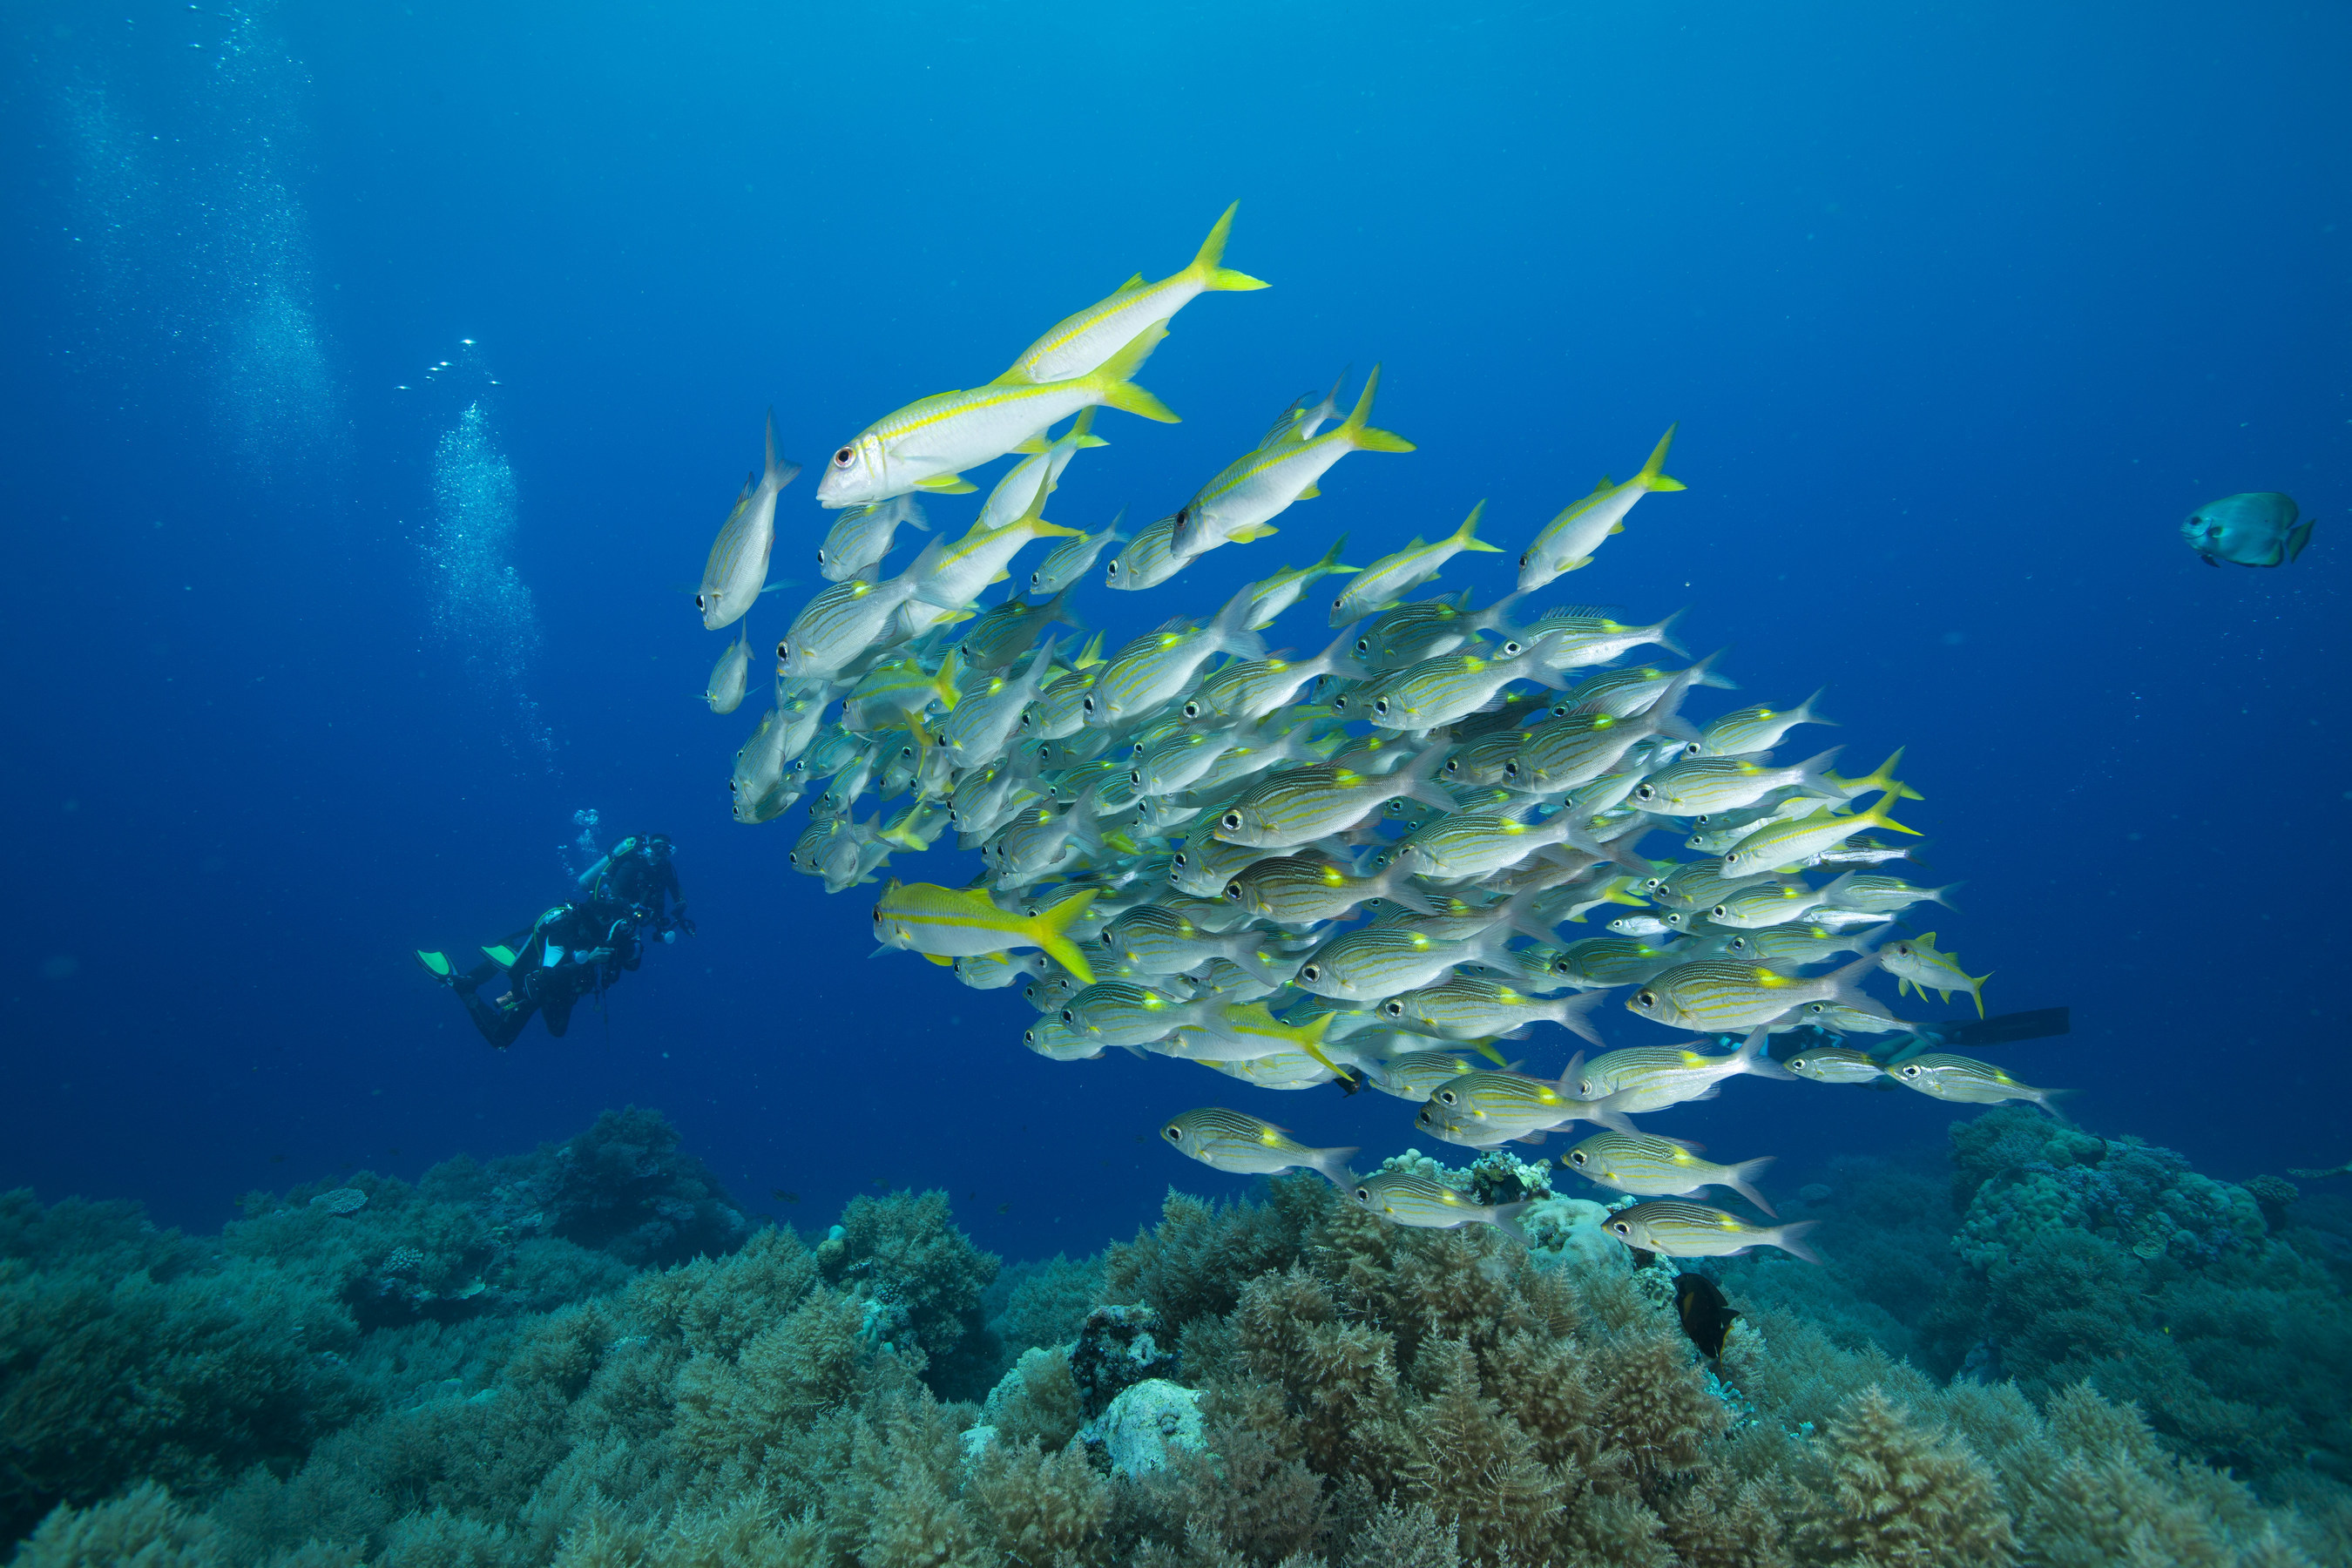 Palau is home to more than 1,300 species of fish and 700 species of coral.